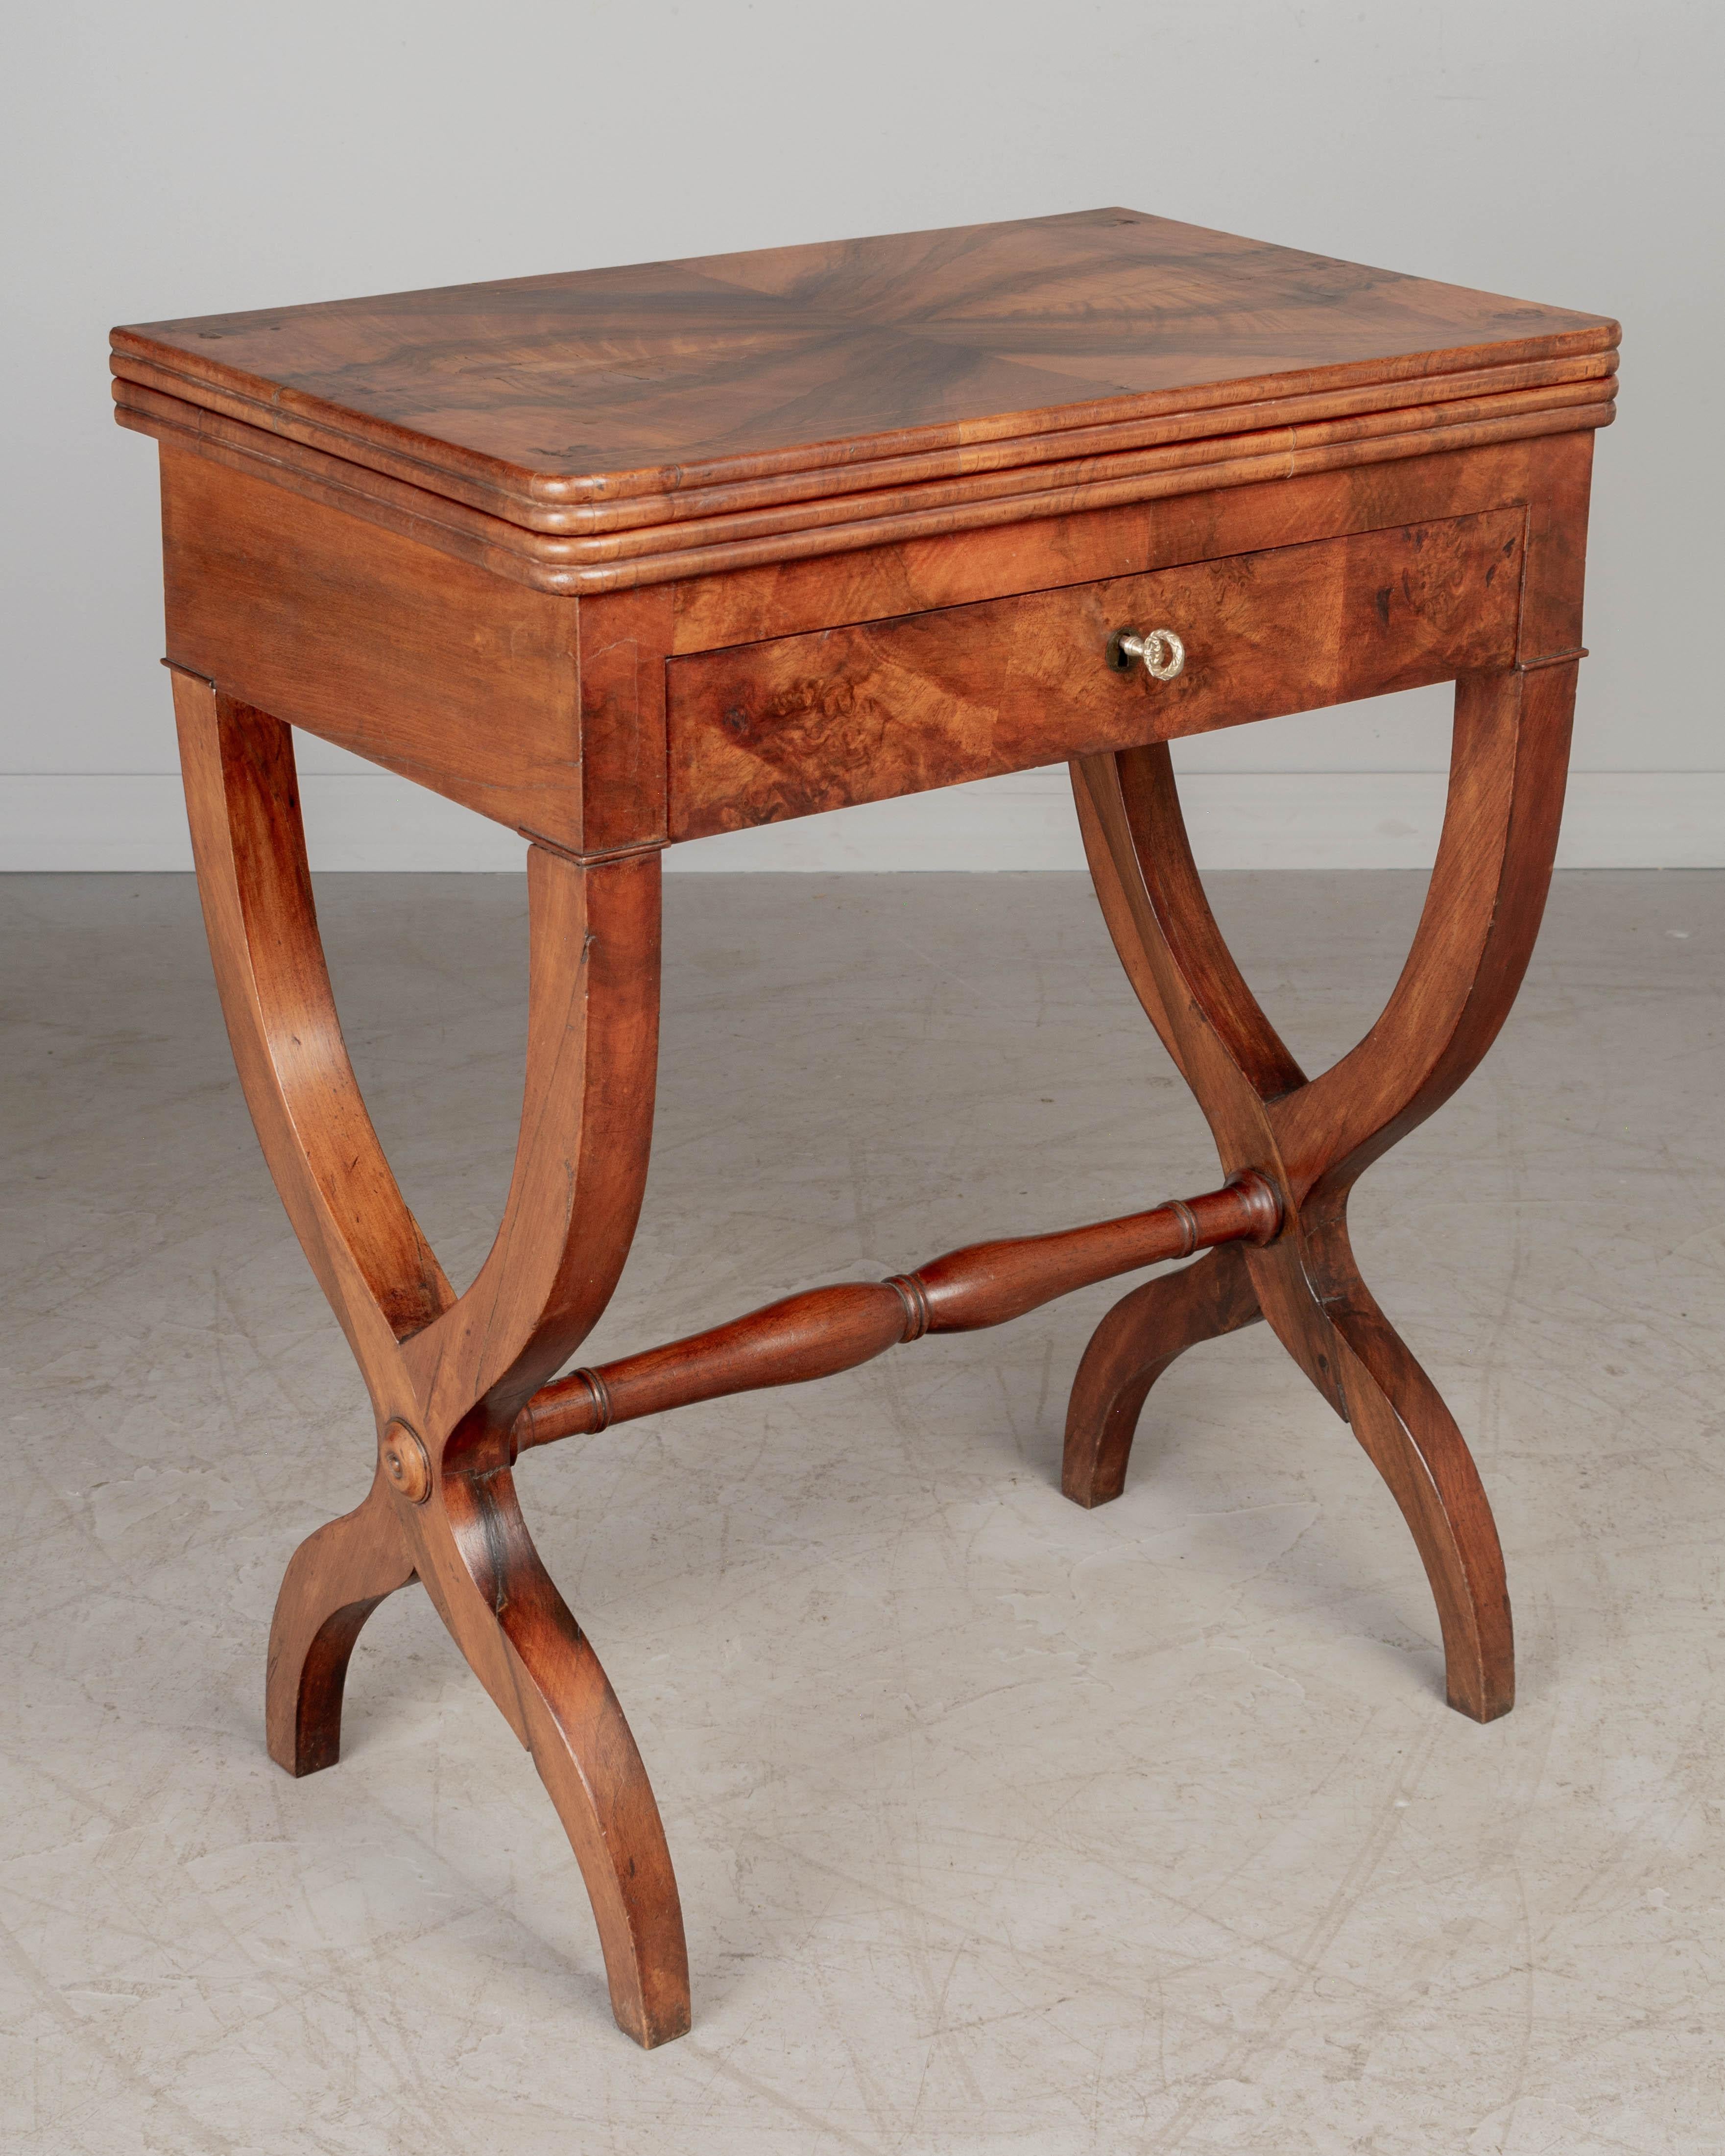 A 19th century French Charles X style flip top game table, or side table, with beautiful book matched veneers of walnut and mahogany. The top rotates and flips open to reveal a green felt covered surface and interior divided compartment for game